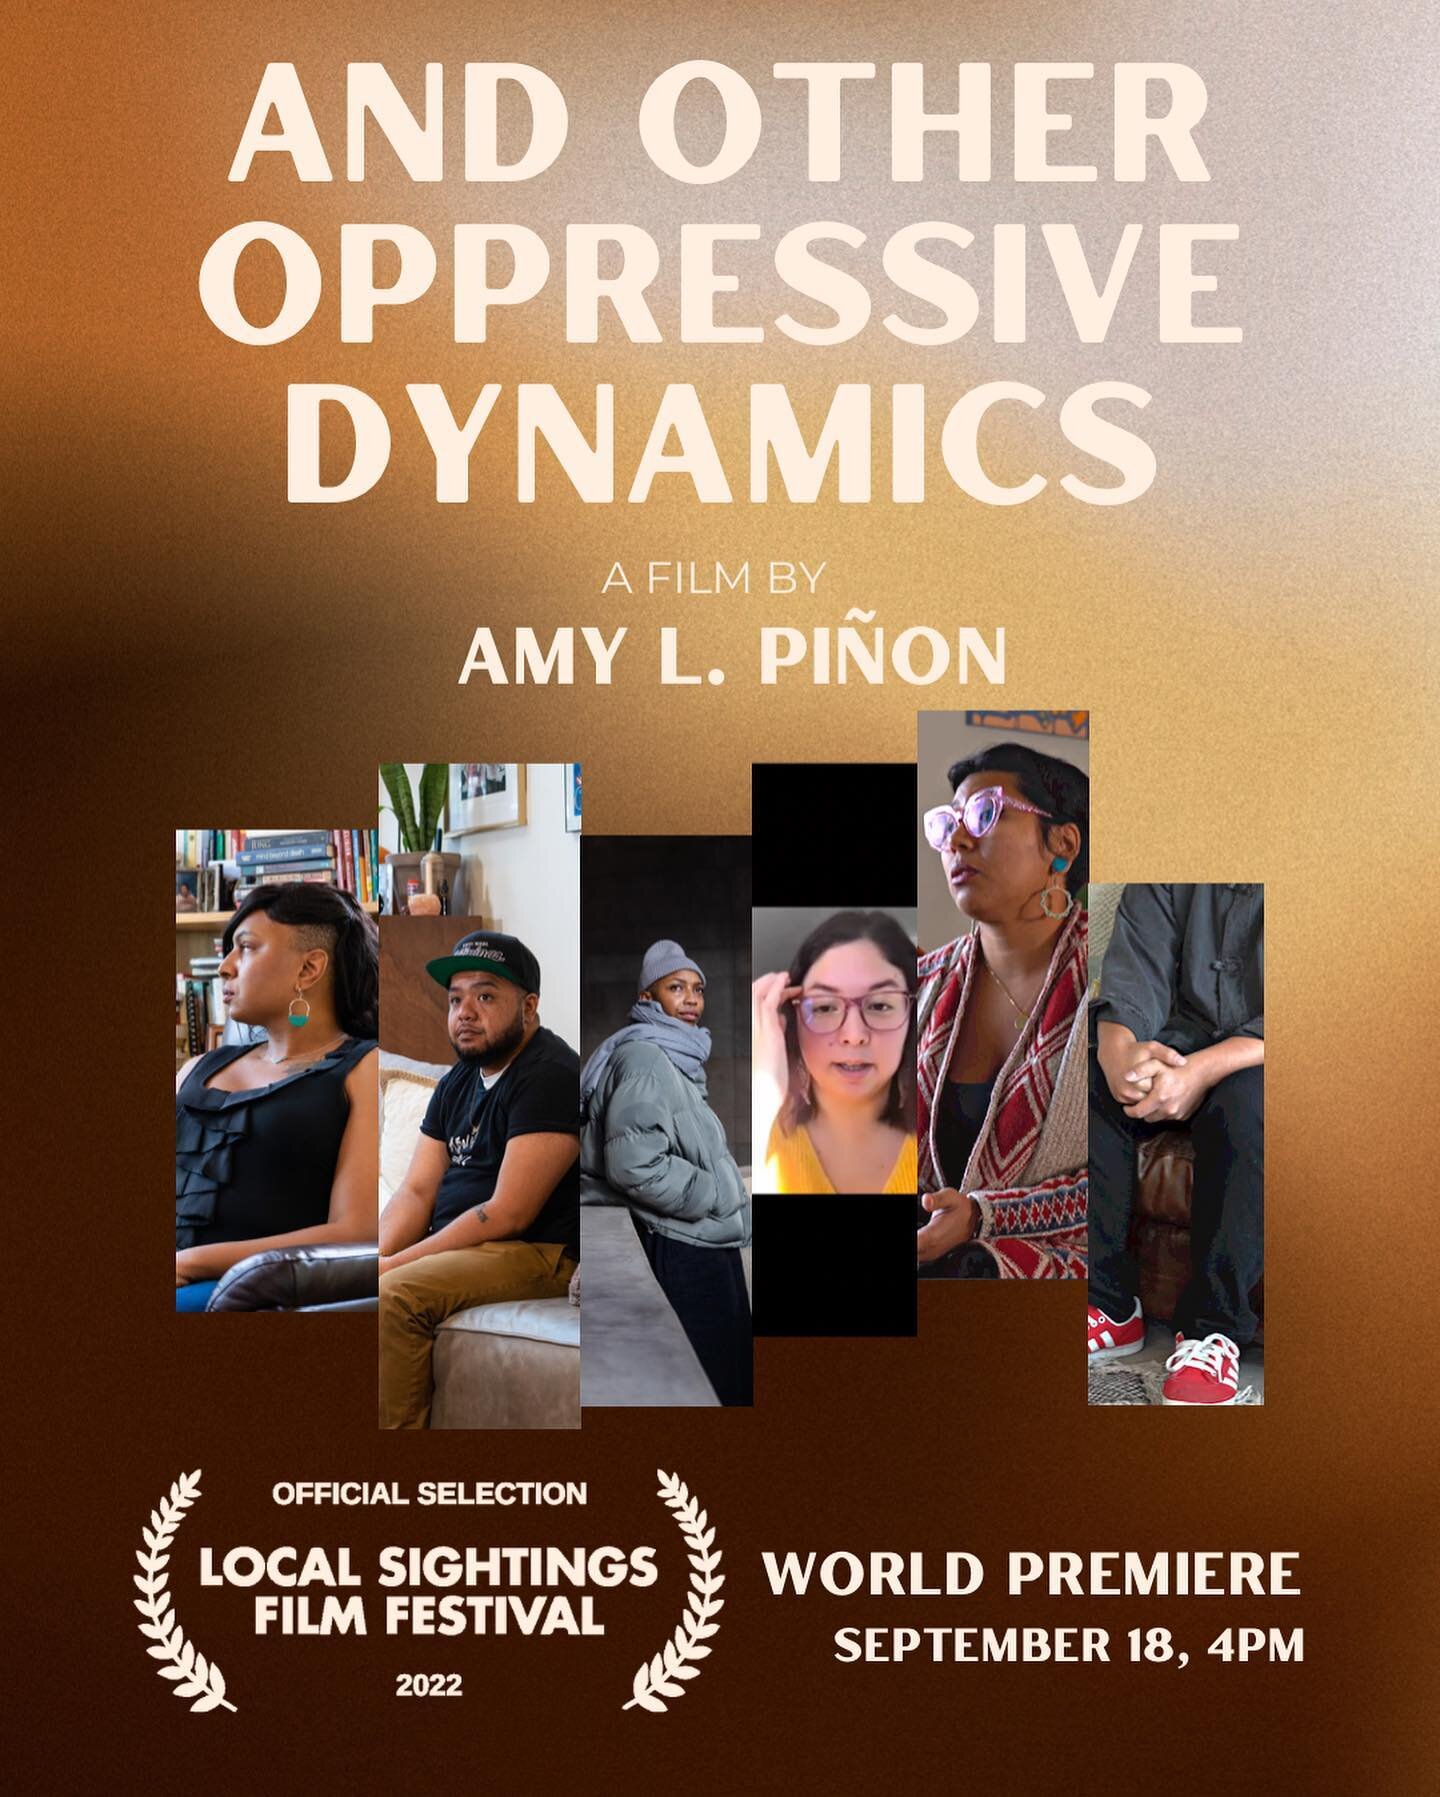 ✨I&rsquo;m proud to announce the ✨World Premiere✨ of And Other Oppressive Dynamics!✨

Local Sightings Film Festival
September 18, 4pm (in person)
Available online through September 25
🎟Ticket link in bio🎟

📷3rd slide is from our first draft screen